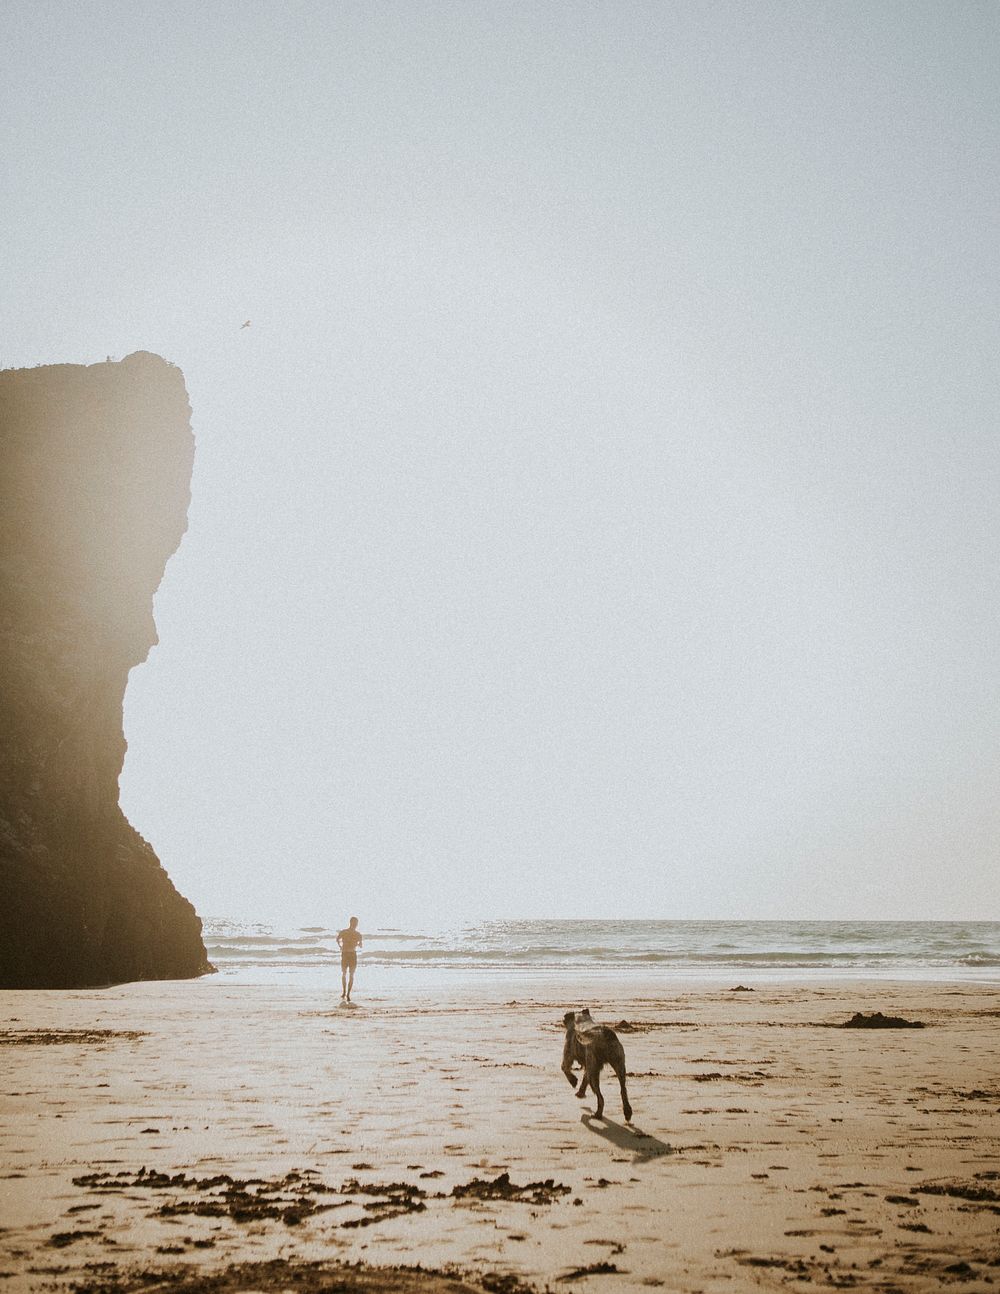 Man and his dog playing at the beach